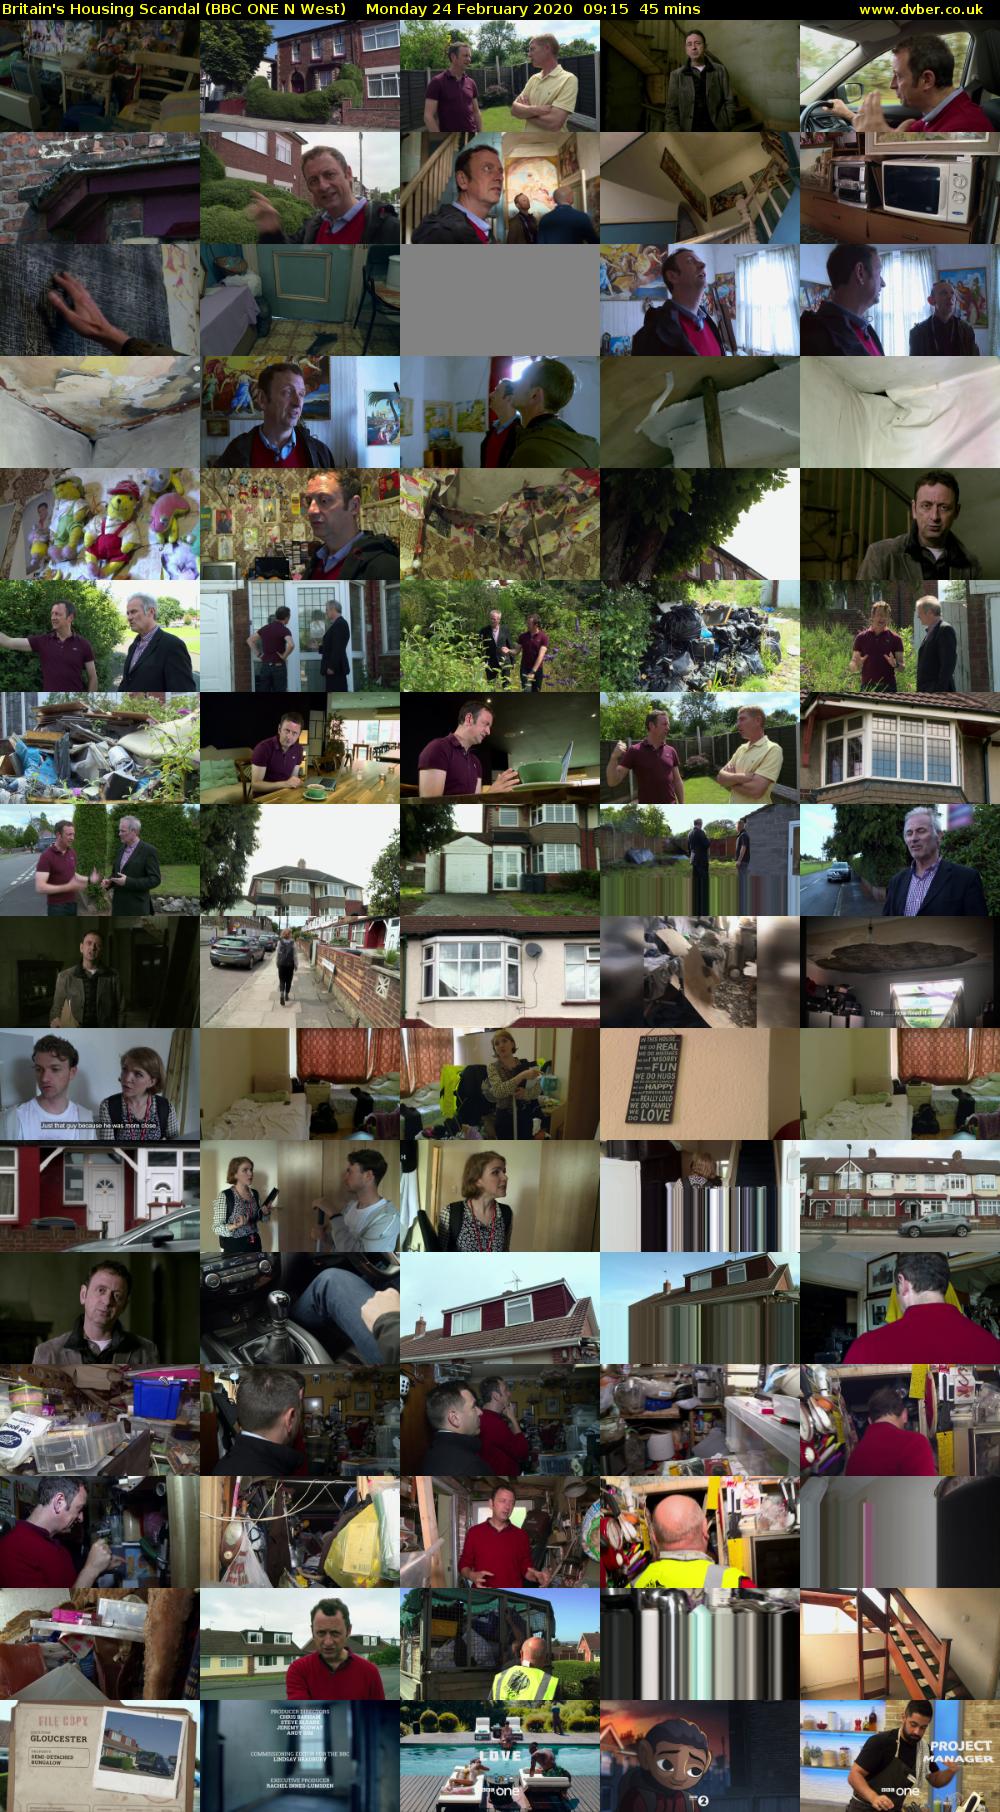 Britain's Housing Scandal (BBC ONE N West) Monday 24 February 2020 09:15 - 10:00